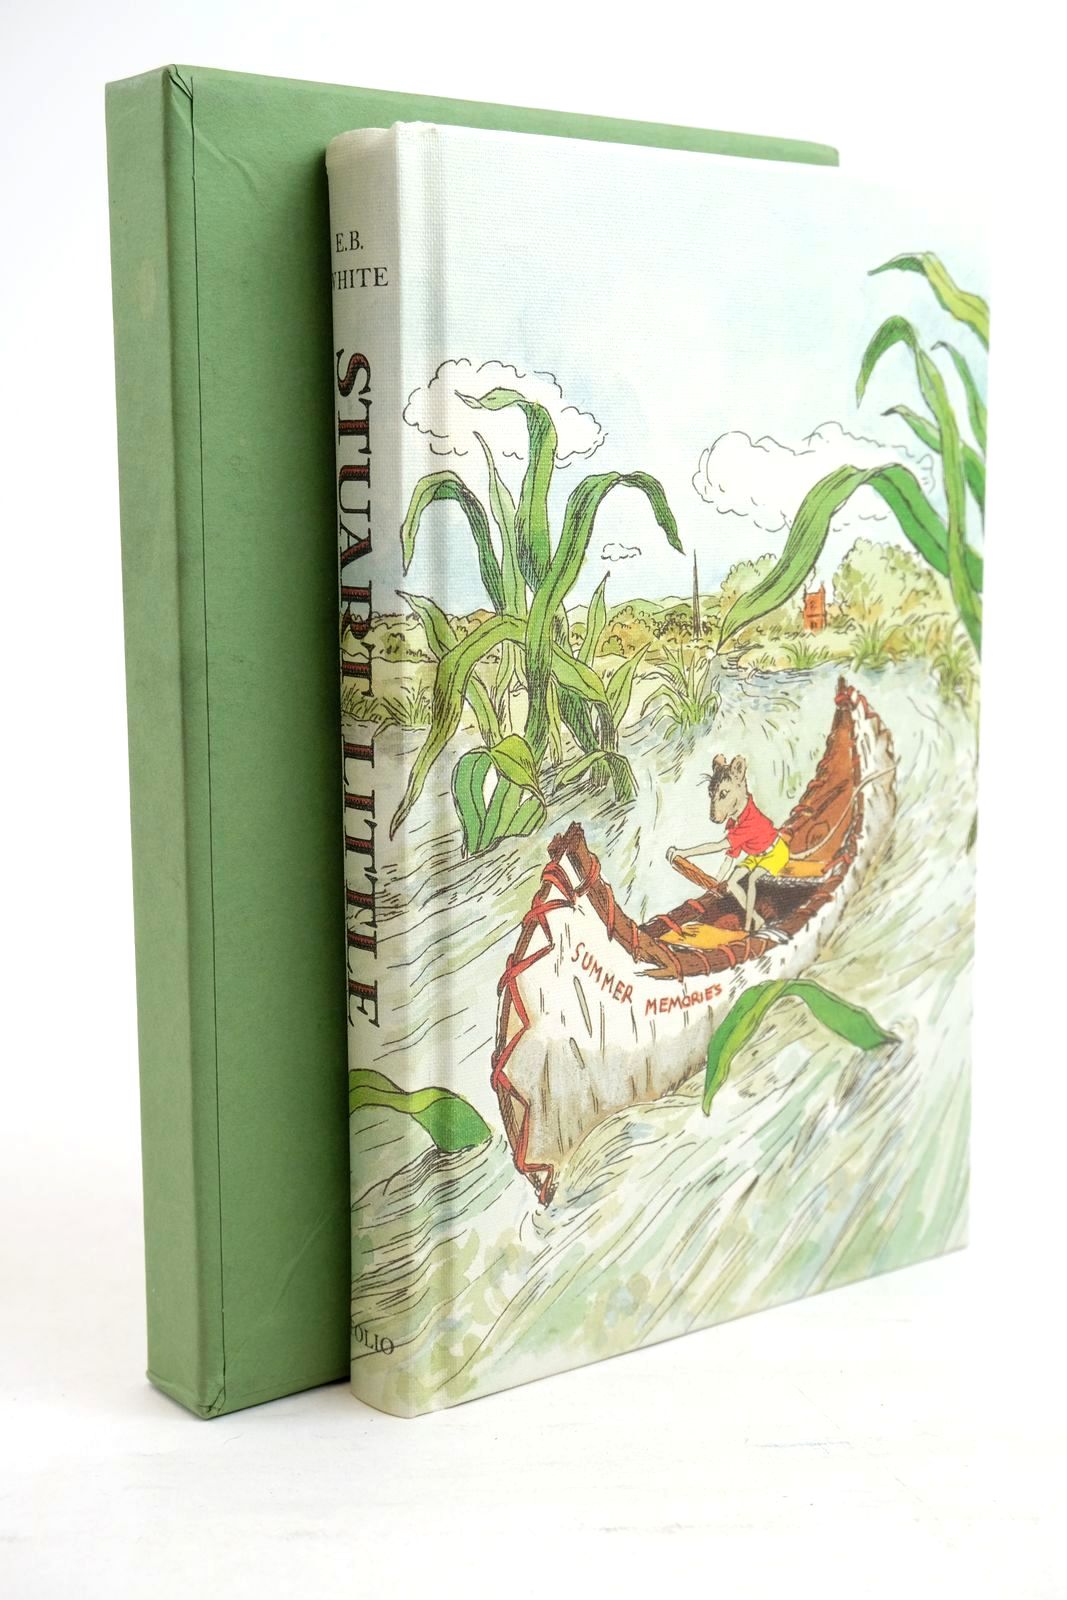 Photo of STUART LITTLE written by White, E.B. DiTerlizzi, Tony illustrated by Williams, Garth Wells, Rosemary published by Folio Society (STOCK CODE: 1320934)  for sale by Stella & Rose's Books